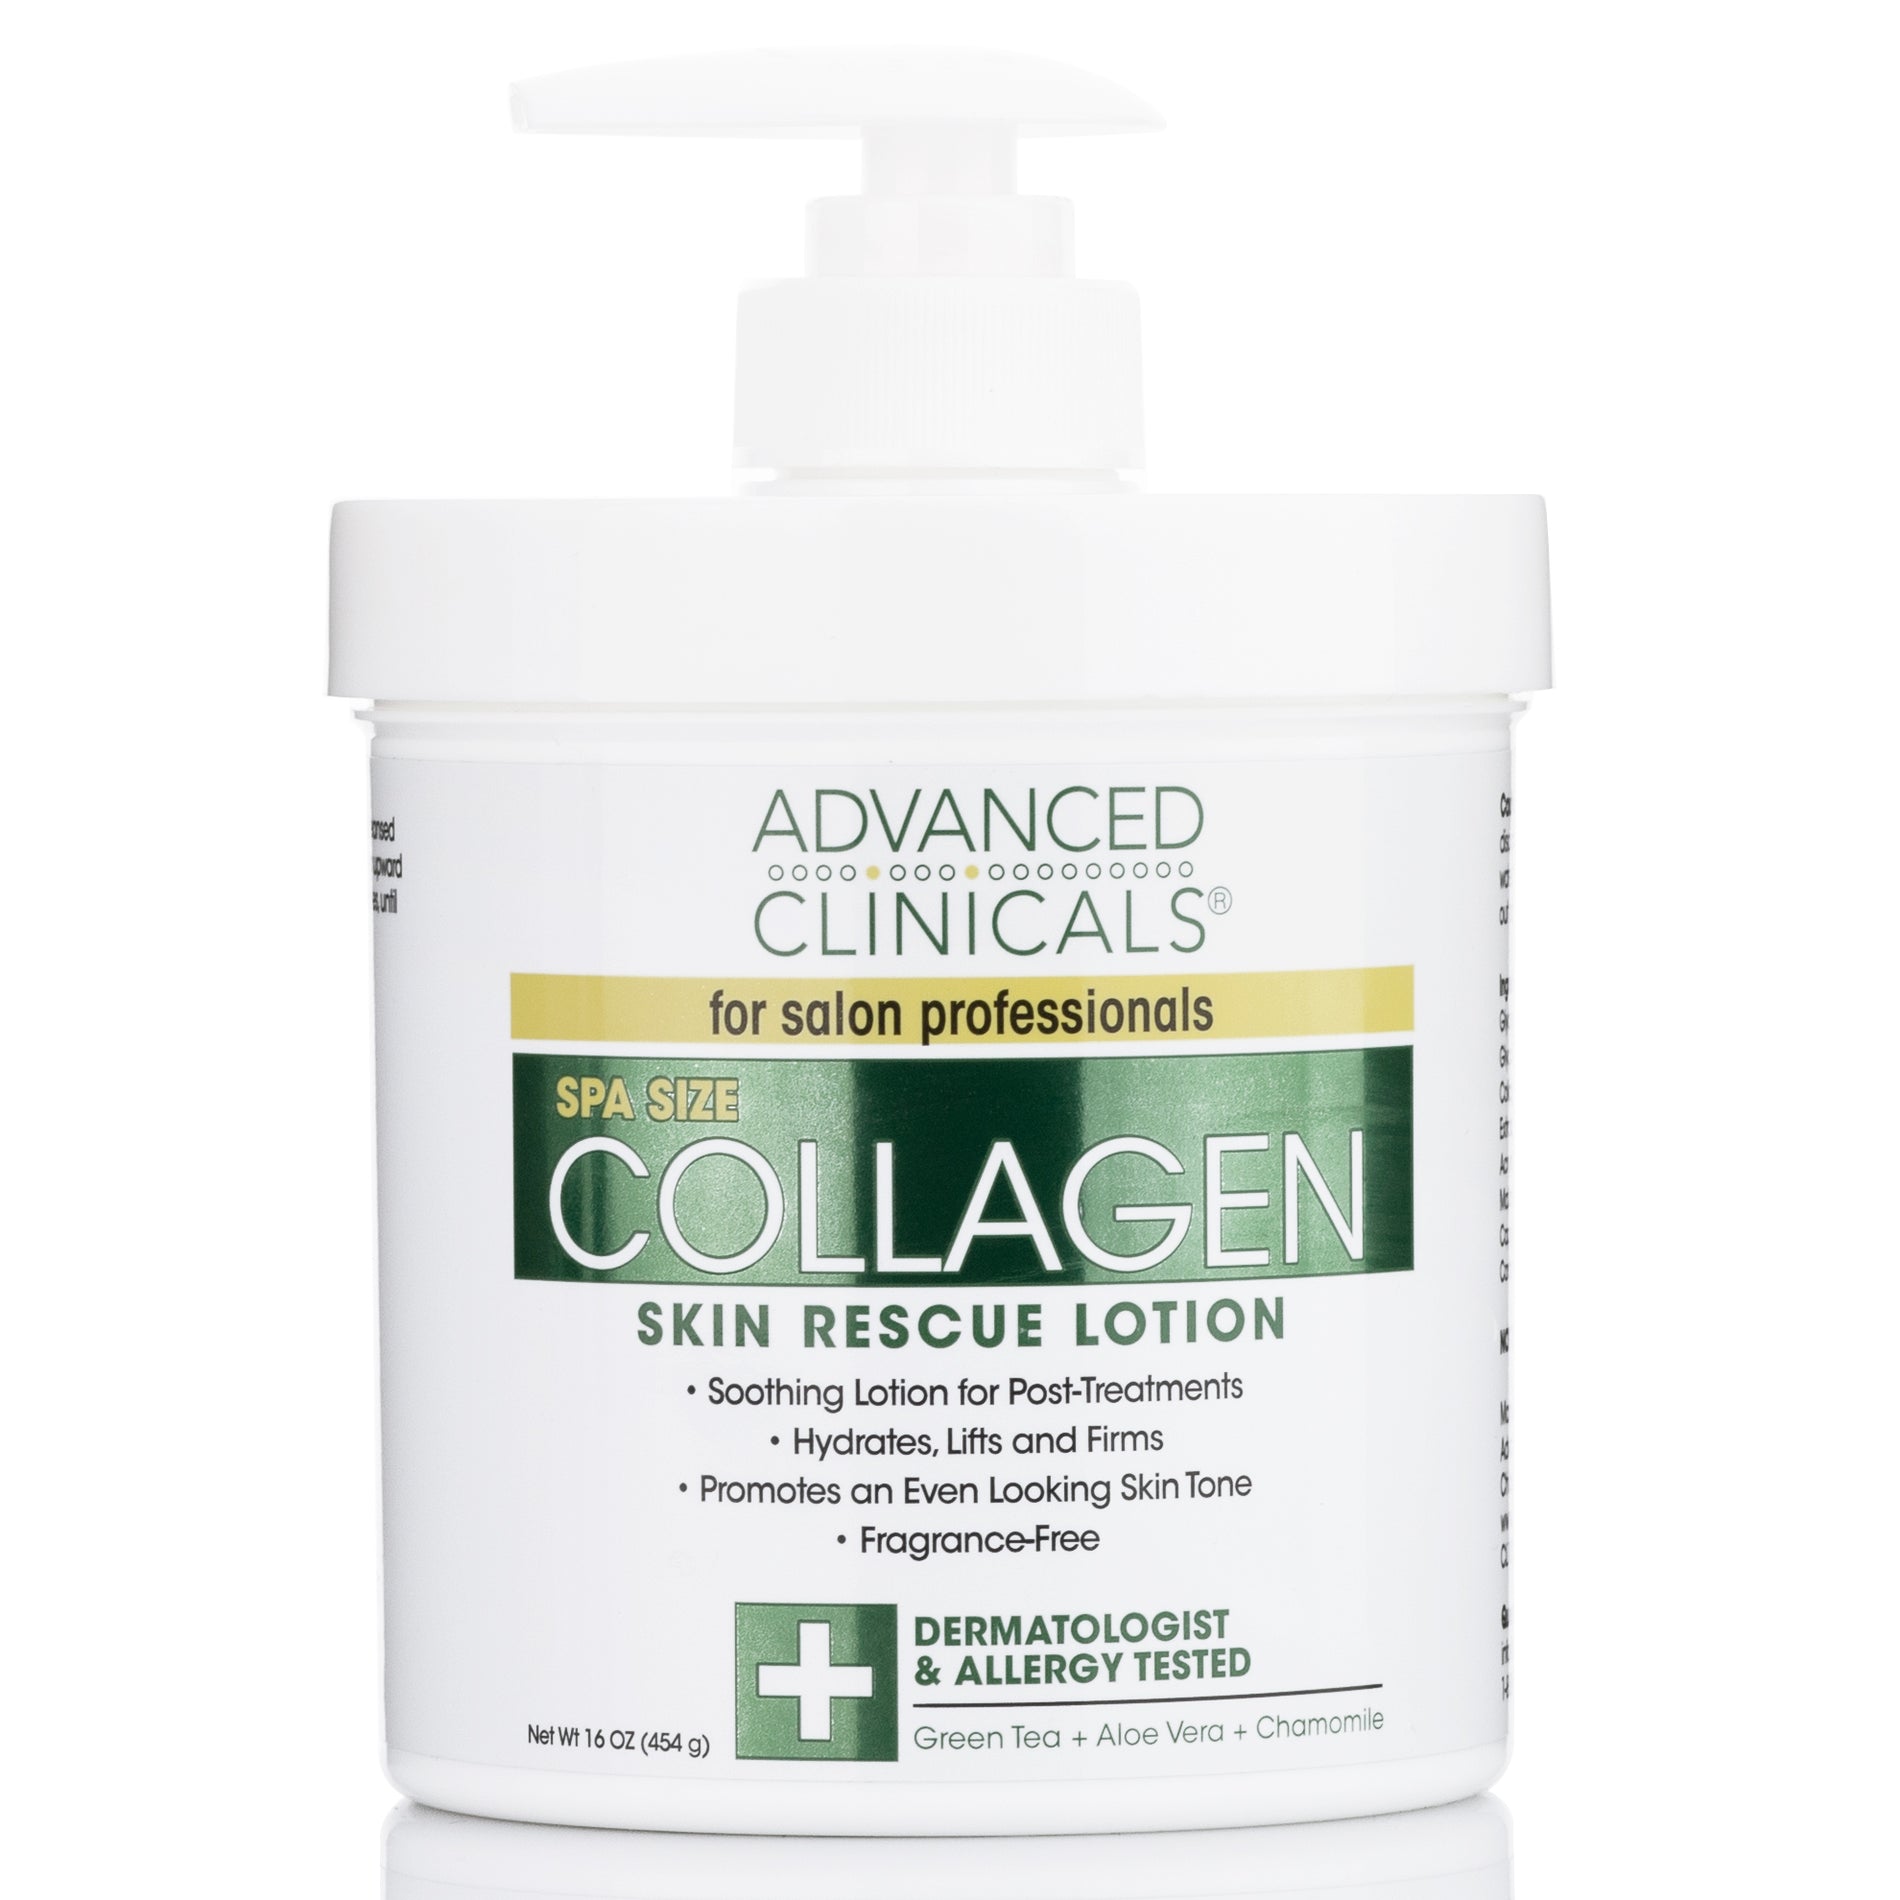 Collagen Skin Rescue Lotion (No Added Fragrance) - Advanced Clinicals